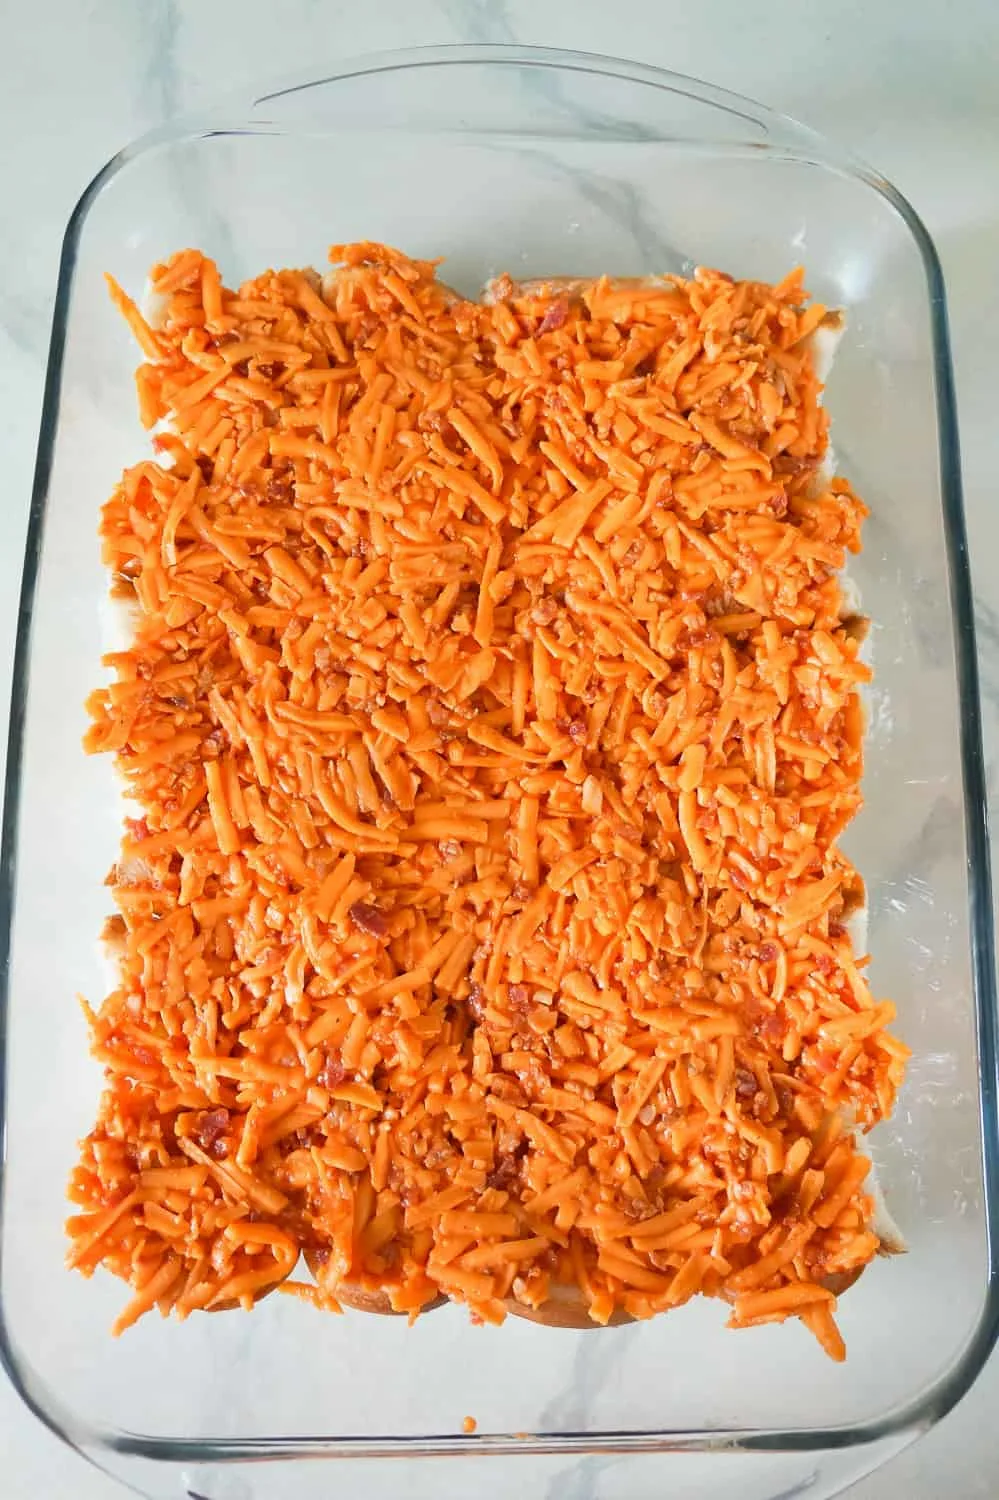 shredded cheddar cheese and bacon mixture in a baking dish